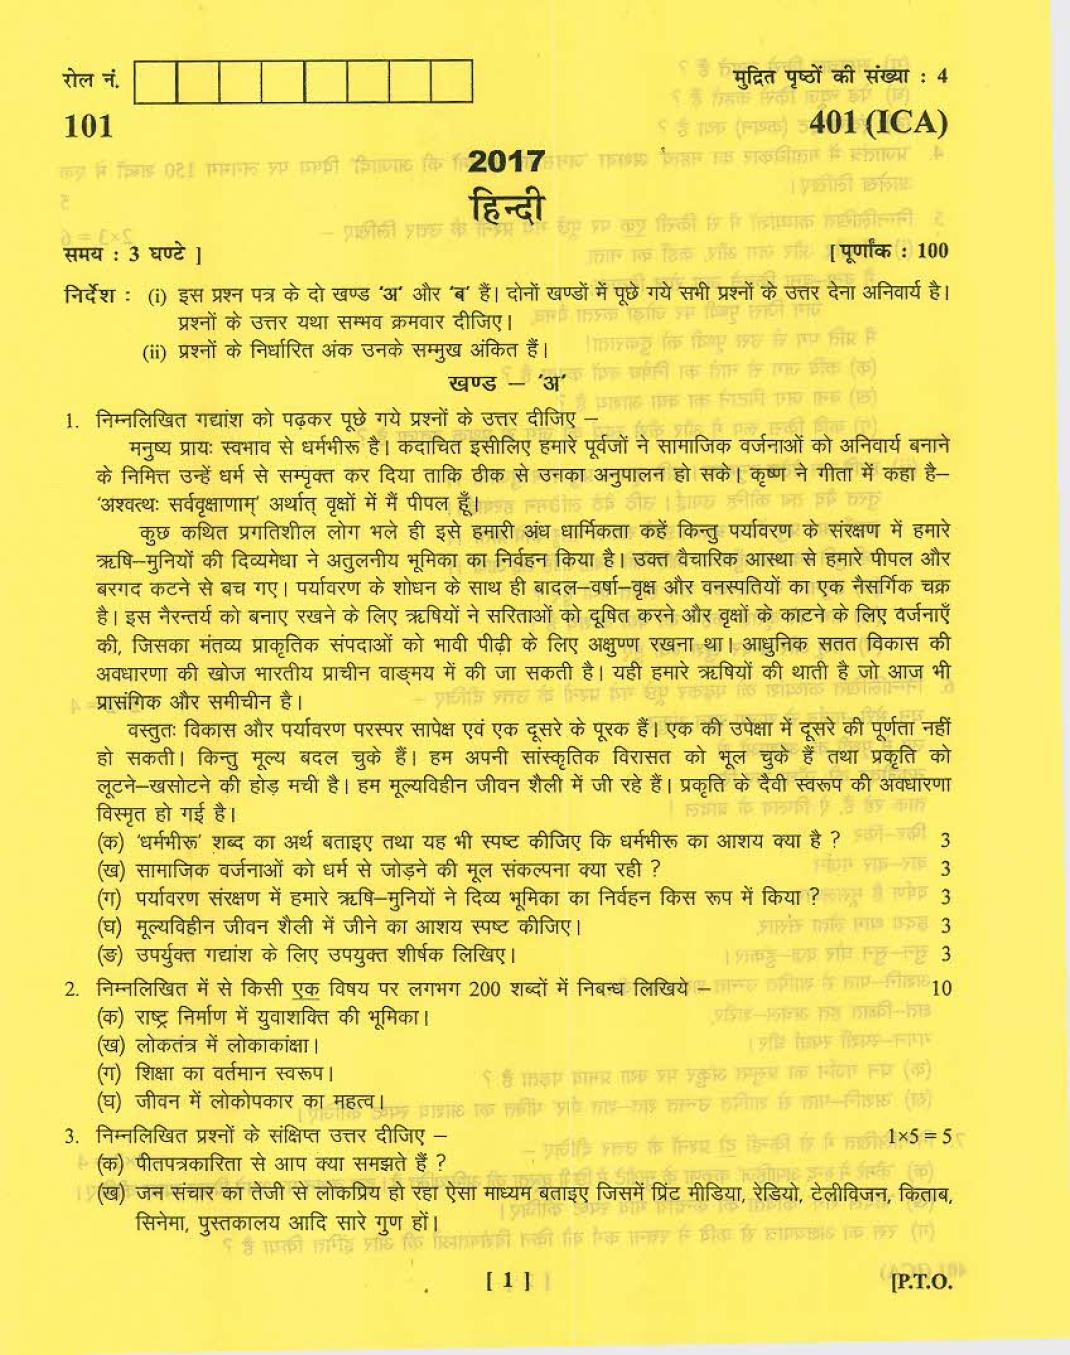 Uttarakhand Board Class 12 Question Paper 2017 for Hindi - Page 1